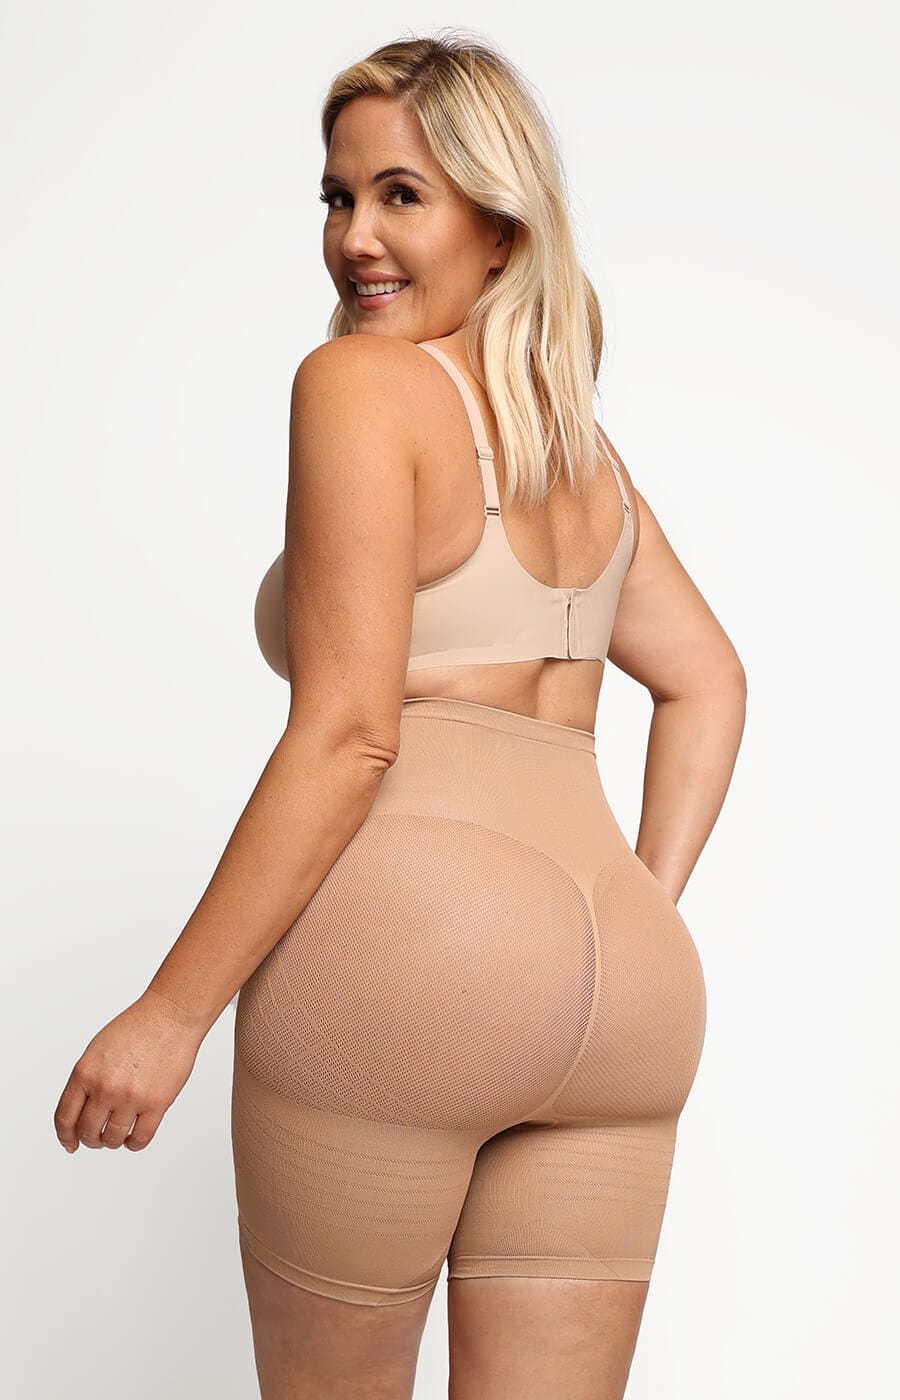 Booker Spanx Shapewear Detachable Panties Women's Peach Seamless Seamless  Lifting Shaping With Pads Briefs